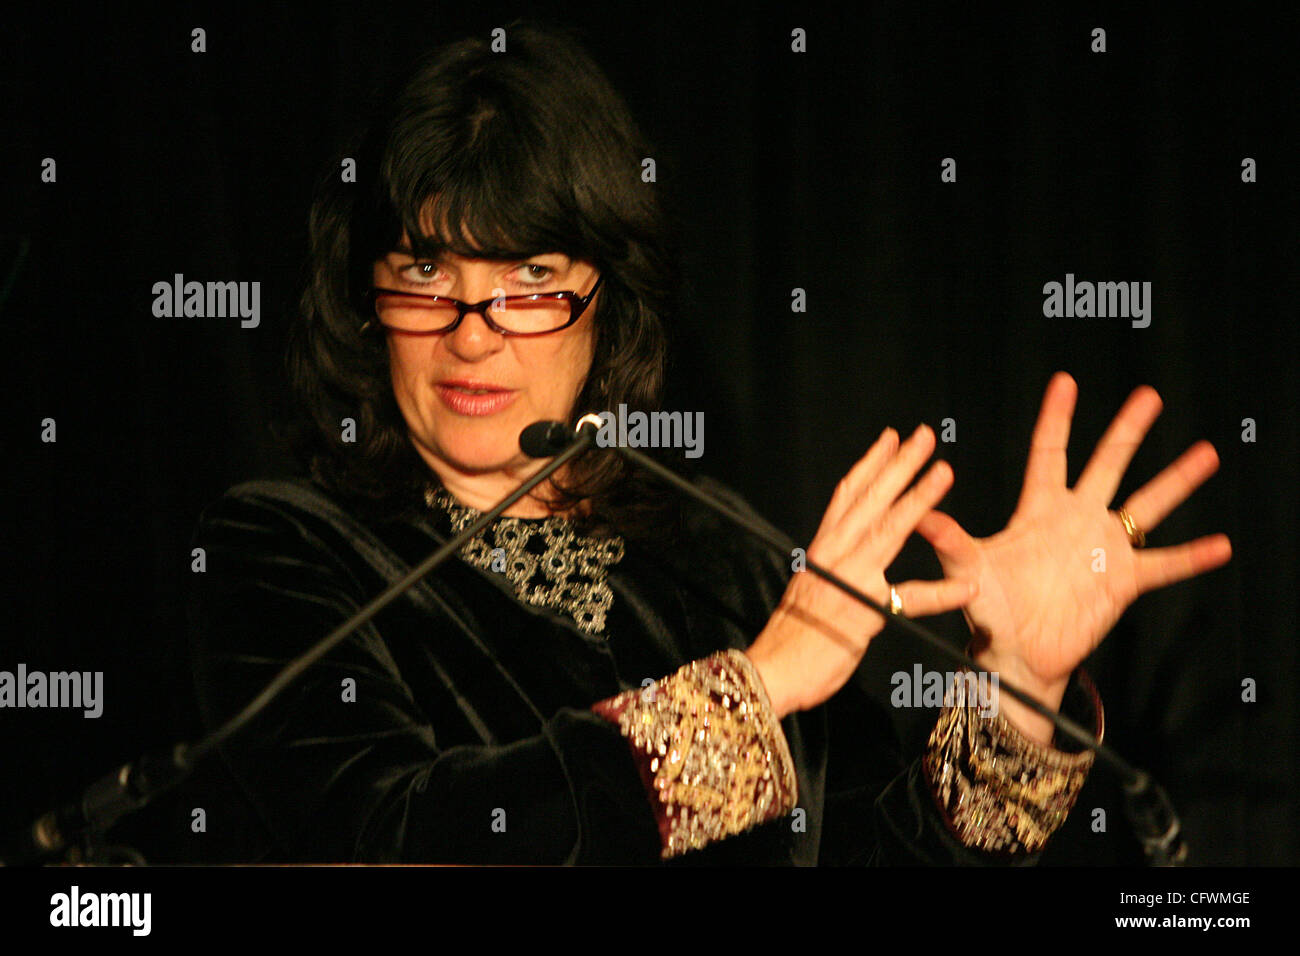 CNN Chief International Correspondent Christiane Amanpour  address as a keynote speaker for the 18th  Annual Scholarship Banquet of the 'National Association of Hispanic Journalists' event in Lower Manhattan March, 1st. 2007. Photo Credit: Mariela Lombard/ ZUMA Press. Stock Photo